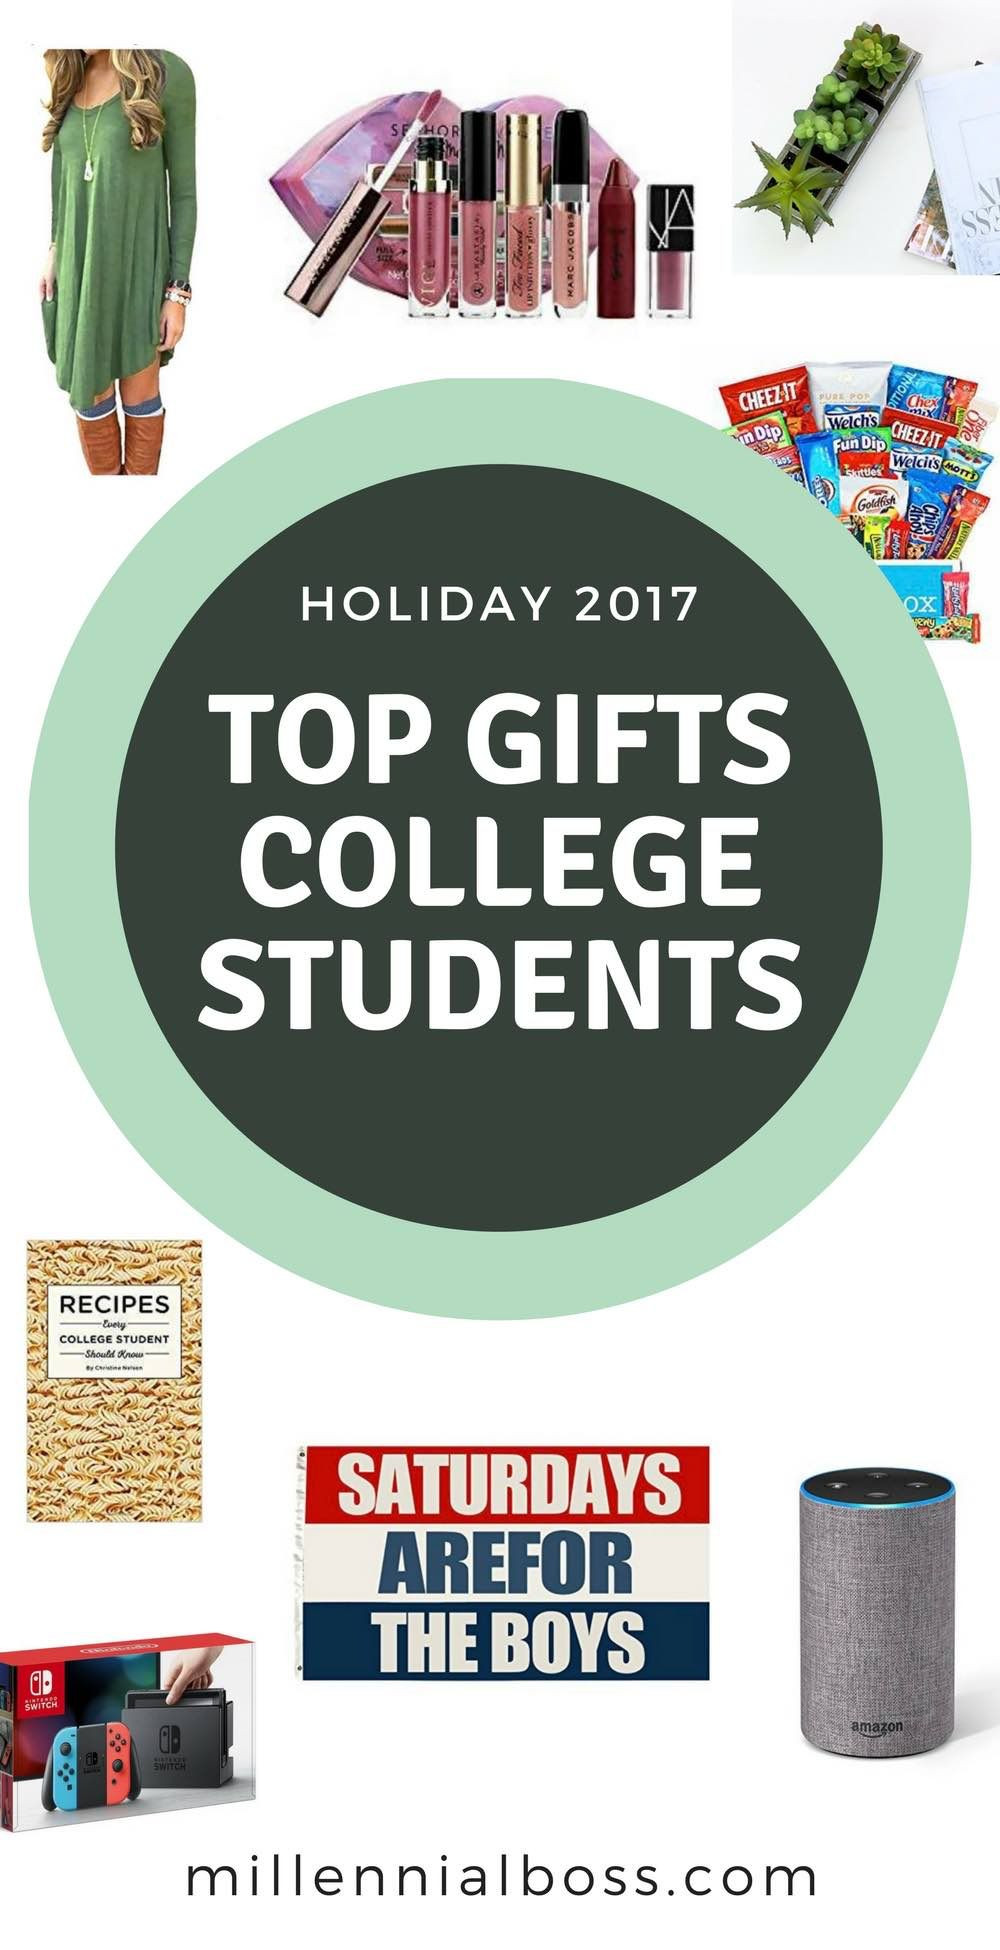 Gift Ideas For College Boys
 Pin on College Student Gift Ideas